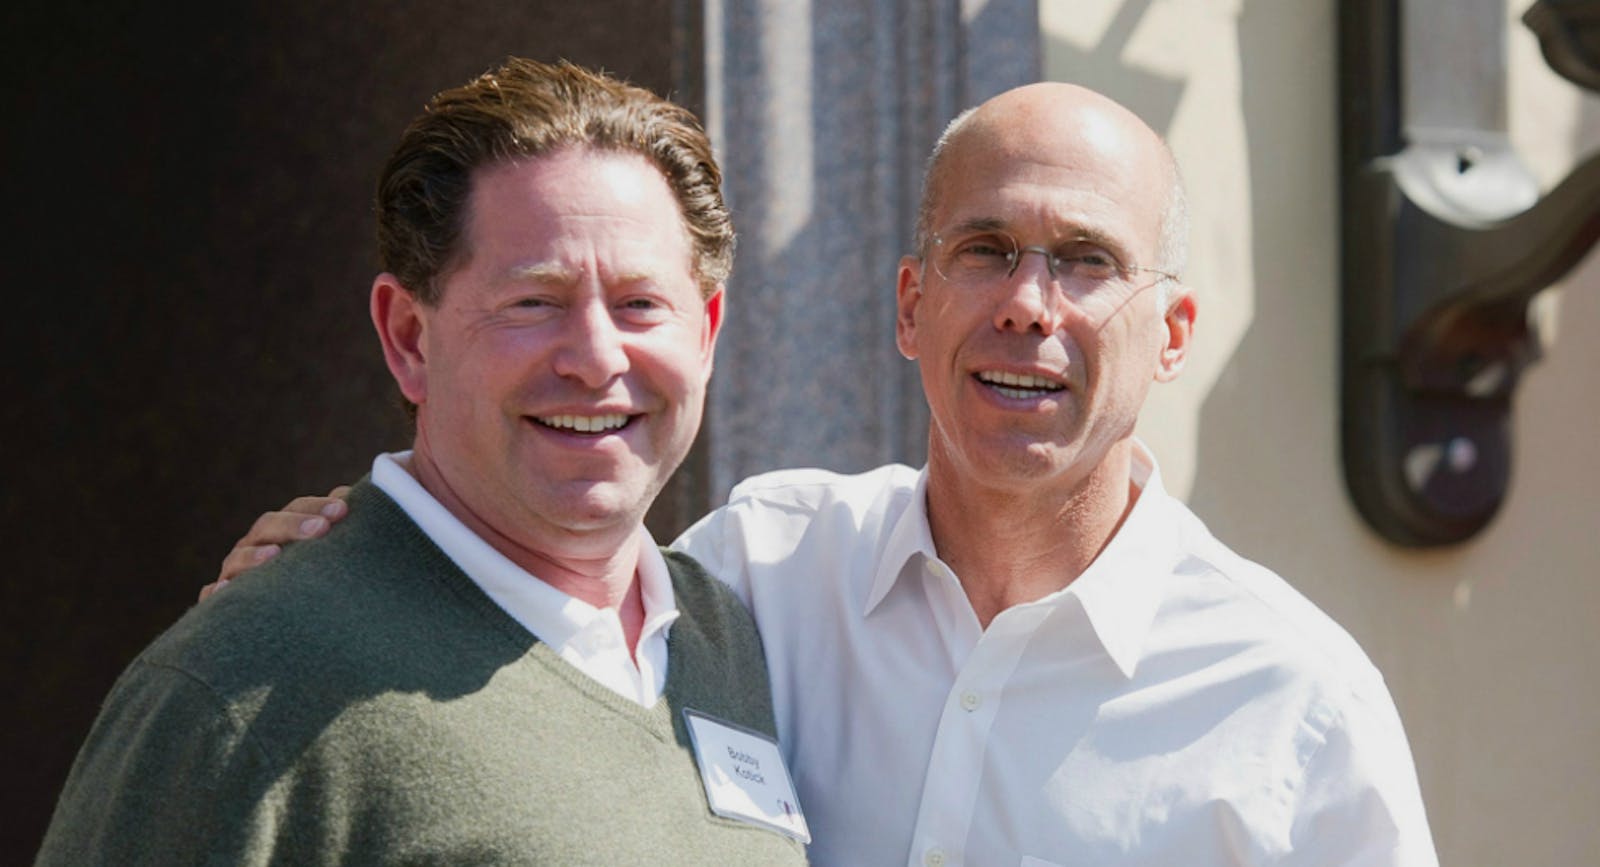 Activision CEO Bobby Kotick with DreamWorks Animation CEO Jeffrey Katzenberg. Photo by Bloomberg.